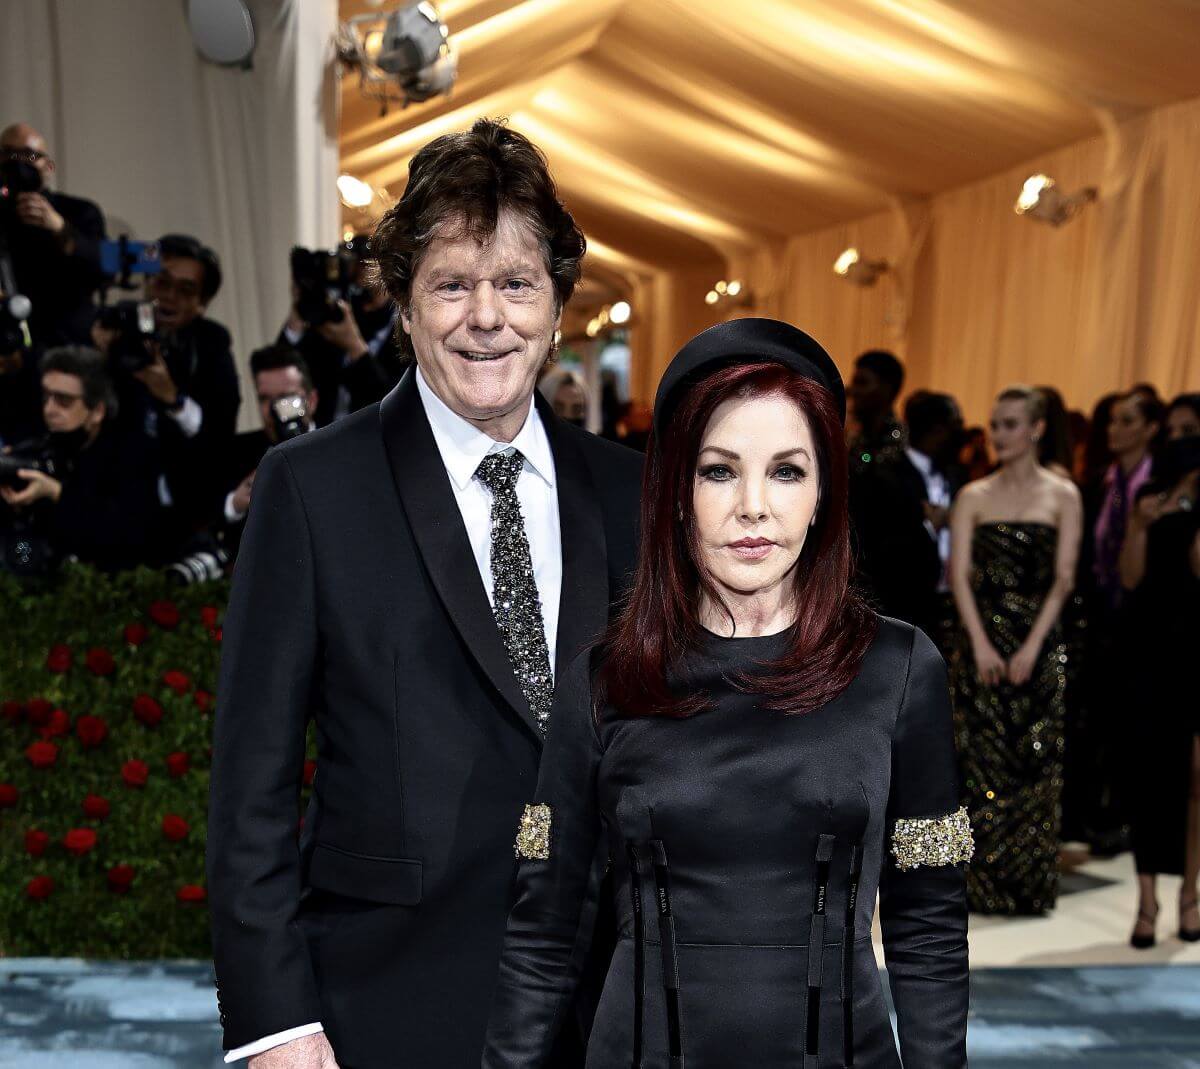 Jerry Schilling and Priscilla Presley wear black and stand on the carpet at the Met Gala.